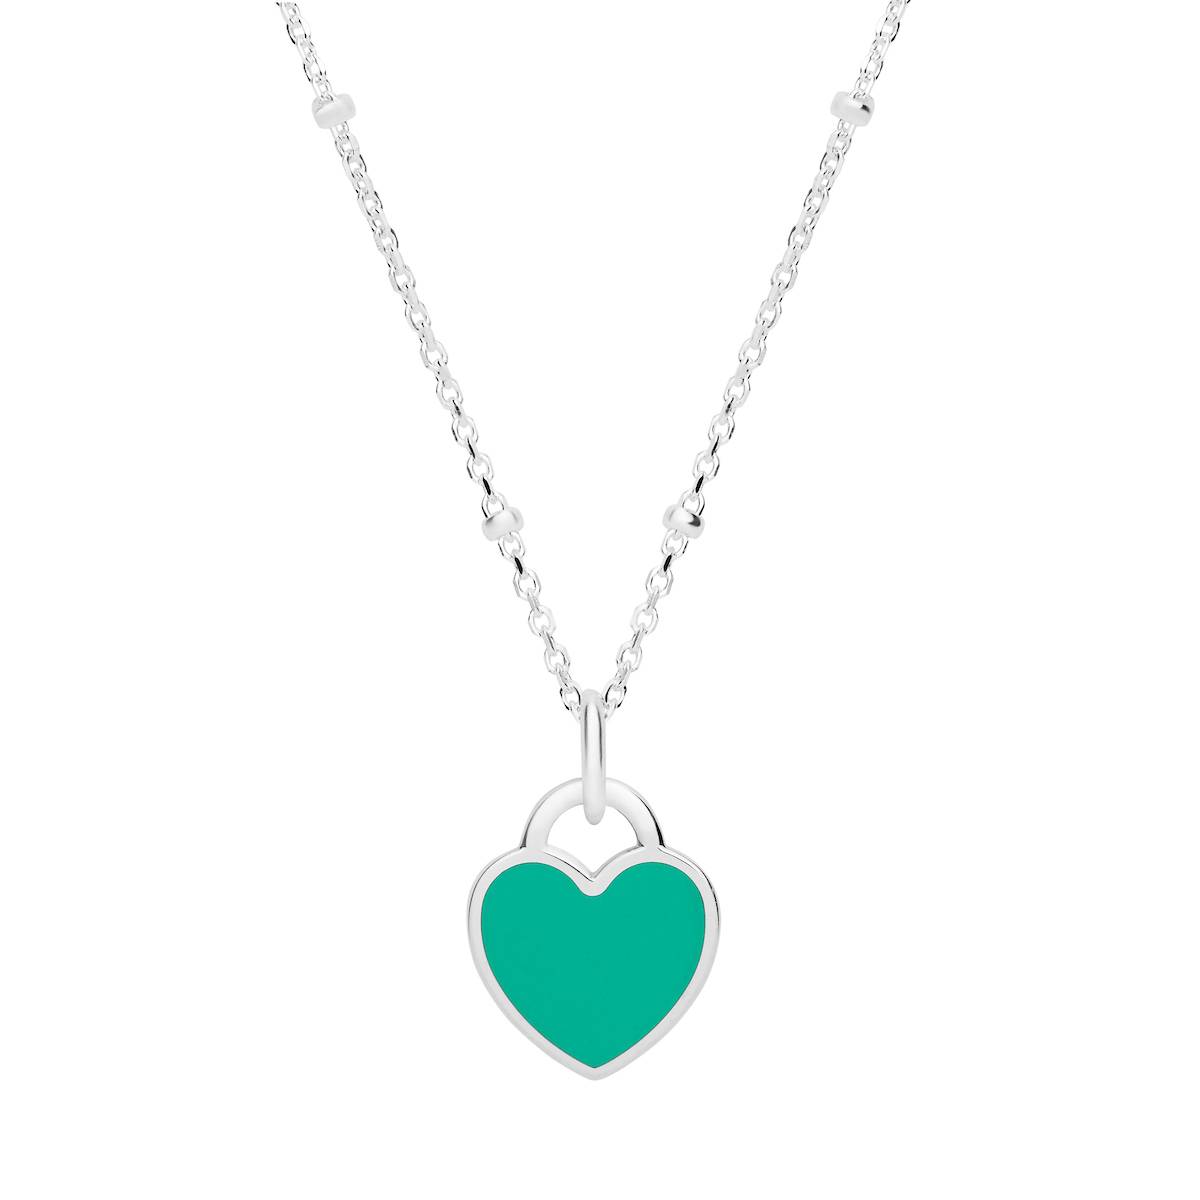 Mini teal heart necklace